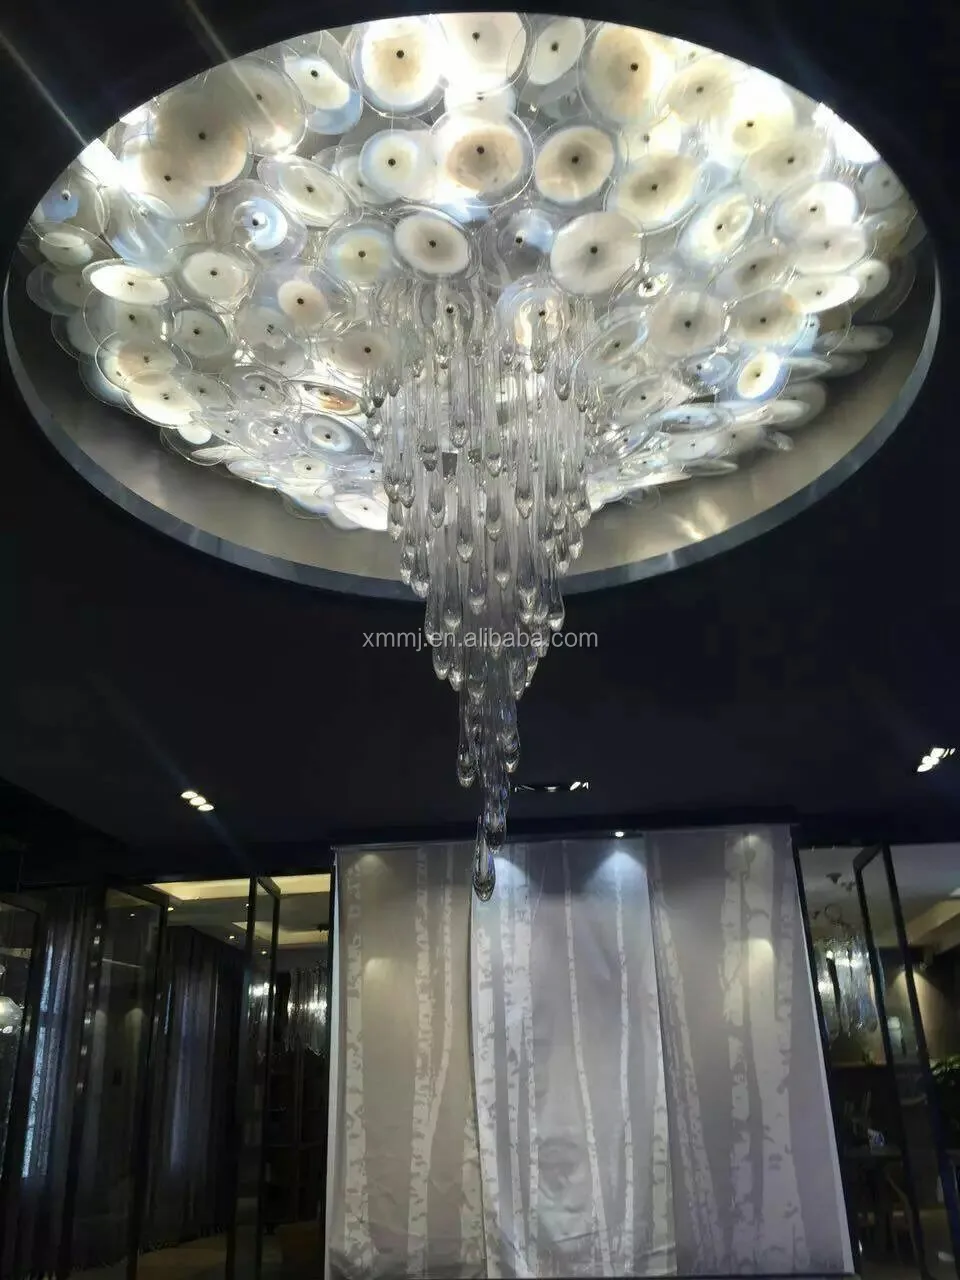 Luxury White Murano Glass Plates Chandelier For Home Or Hotel